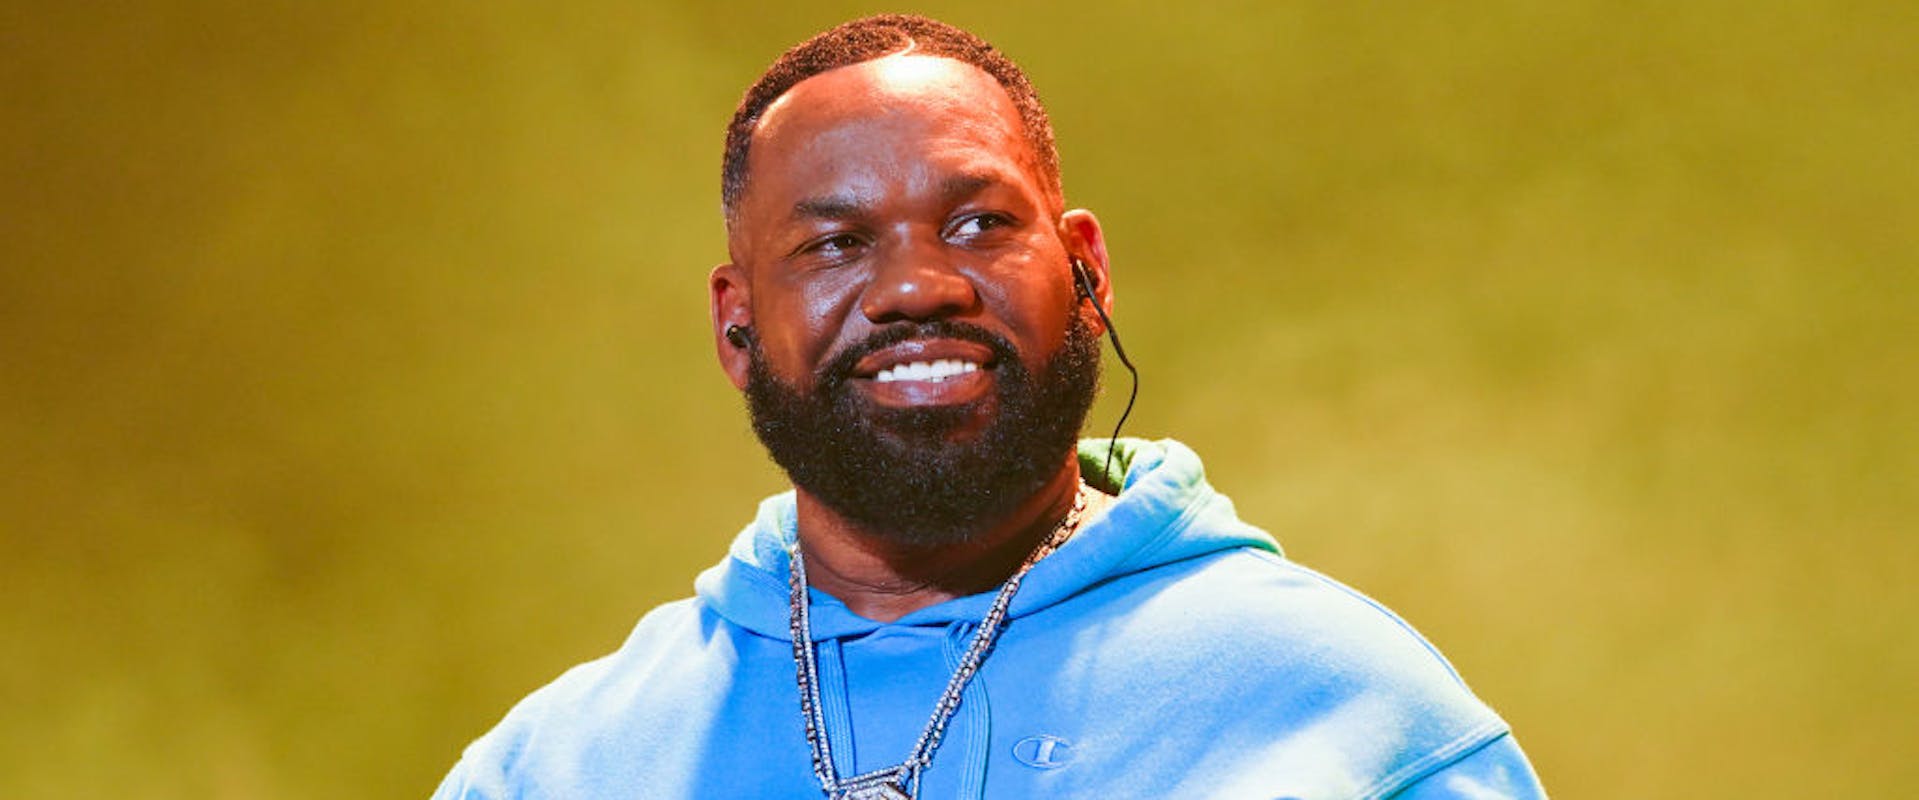 NEW ORLEANS, LOUISIANA - JULY 03: Raekwon of Wu-Tang Clan performs with The Roots during the 2022 Essence Festival of Culture at the Louisiana Superdome on July 03, 2022 in New Orleans, Louisiana. 